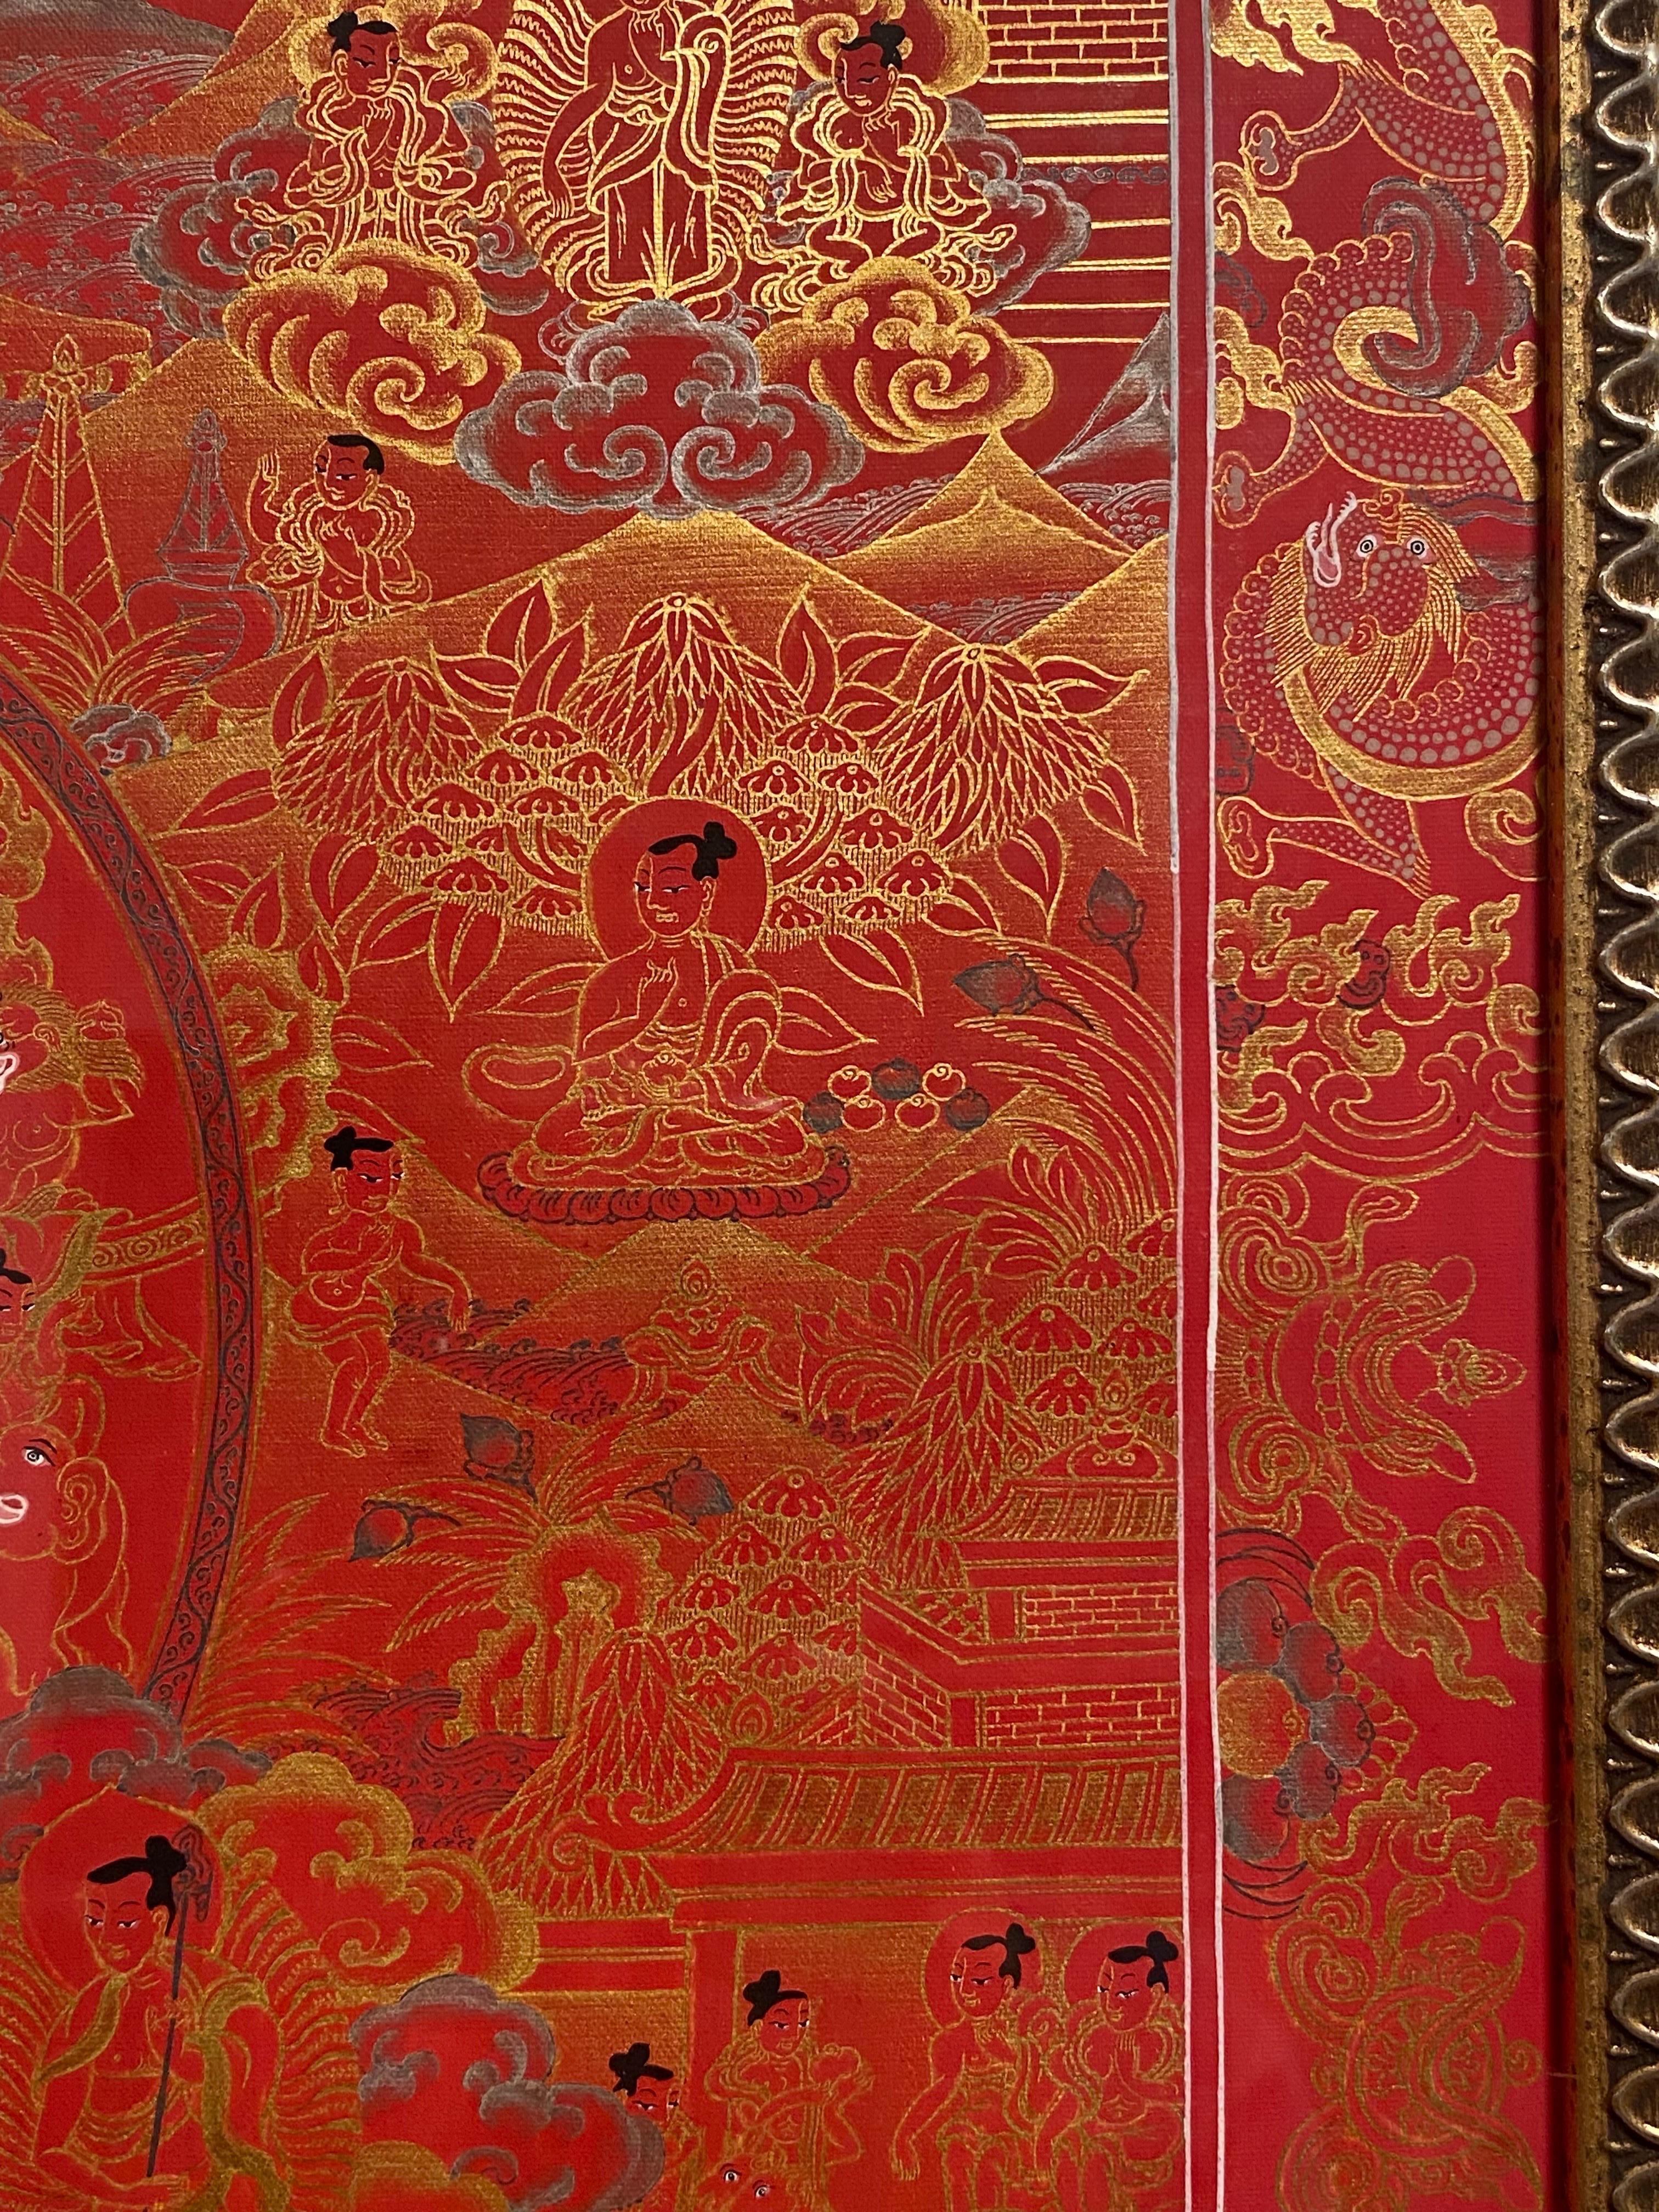 Framed Hand Painted on Canvas Life History of Buddha Thangka 24K Gold For Sale 2